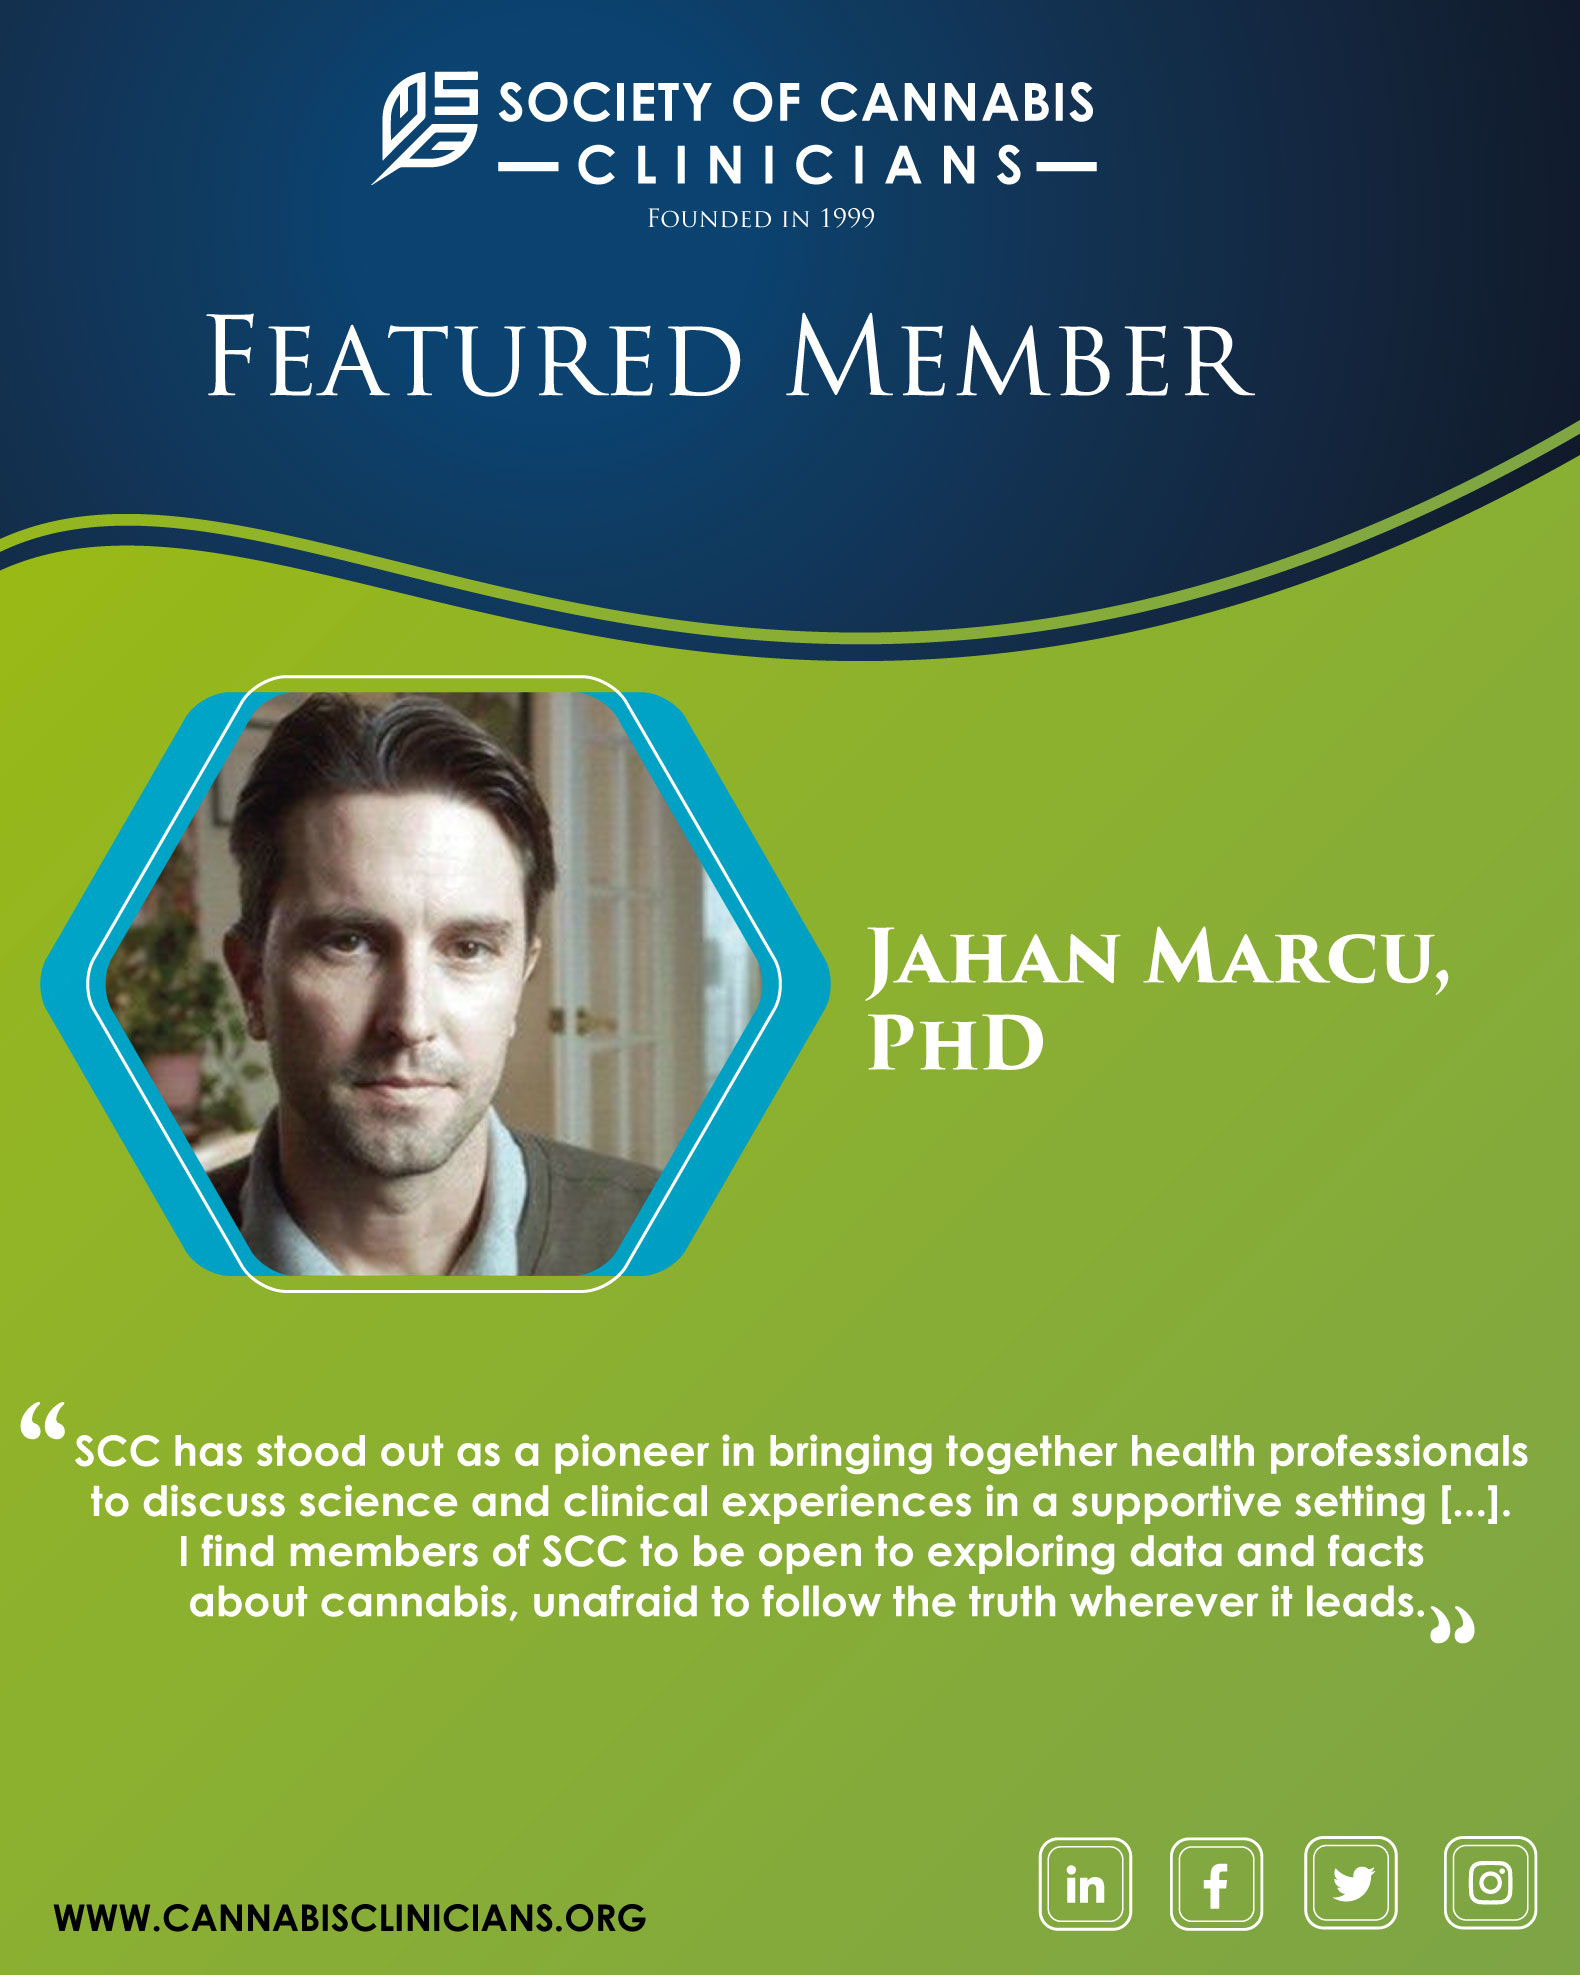 Jahan Marcu, PhD, Chief Scientific Officer of Physicians Research Center Plus